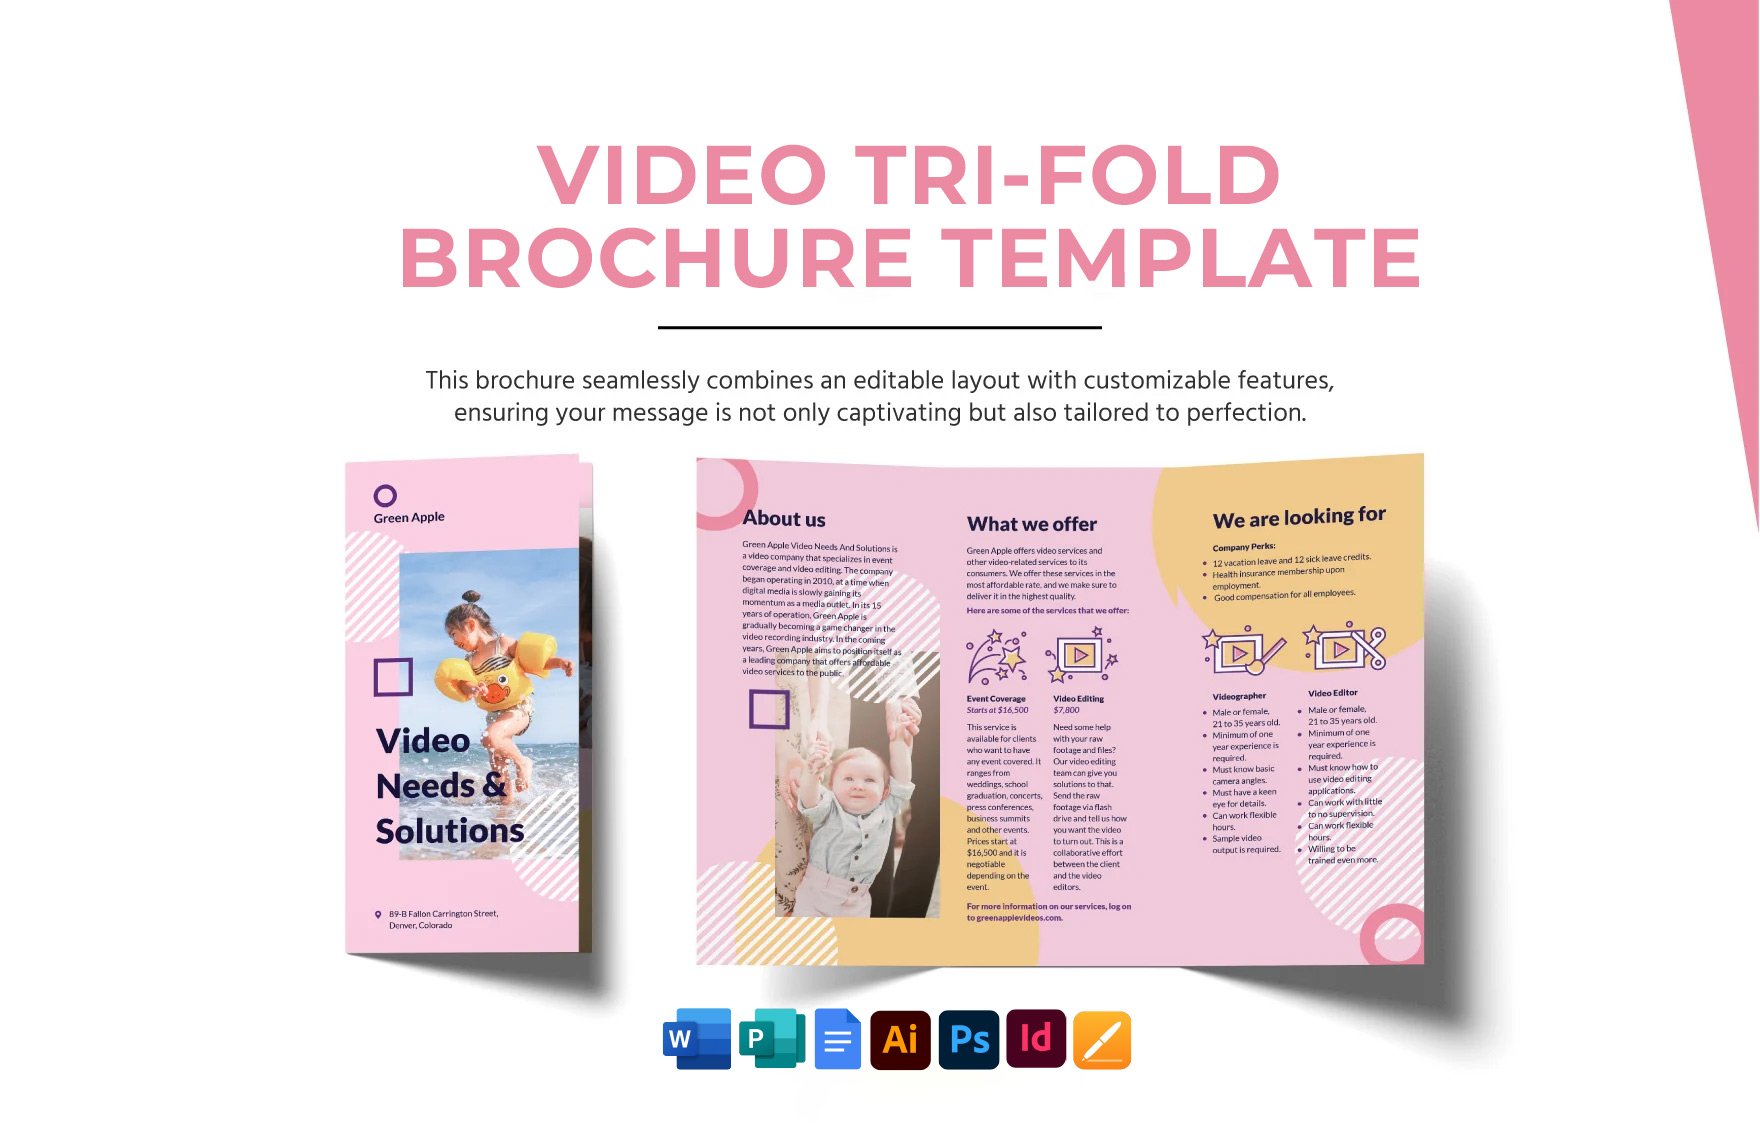 Video Tri-Fold Brochure Template in Word, Google Docs, Illustrator, PSD, Apple Pages, Publisher, InDesign